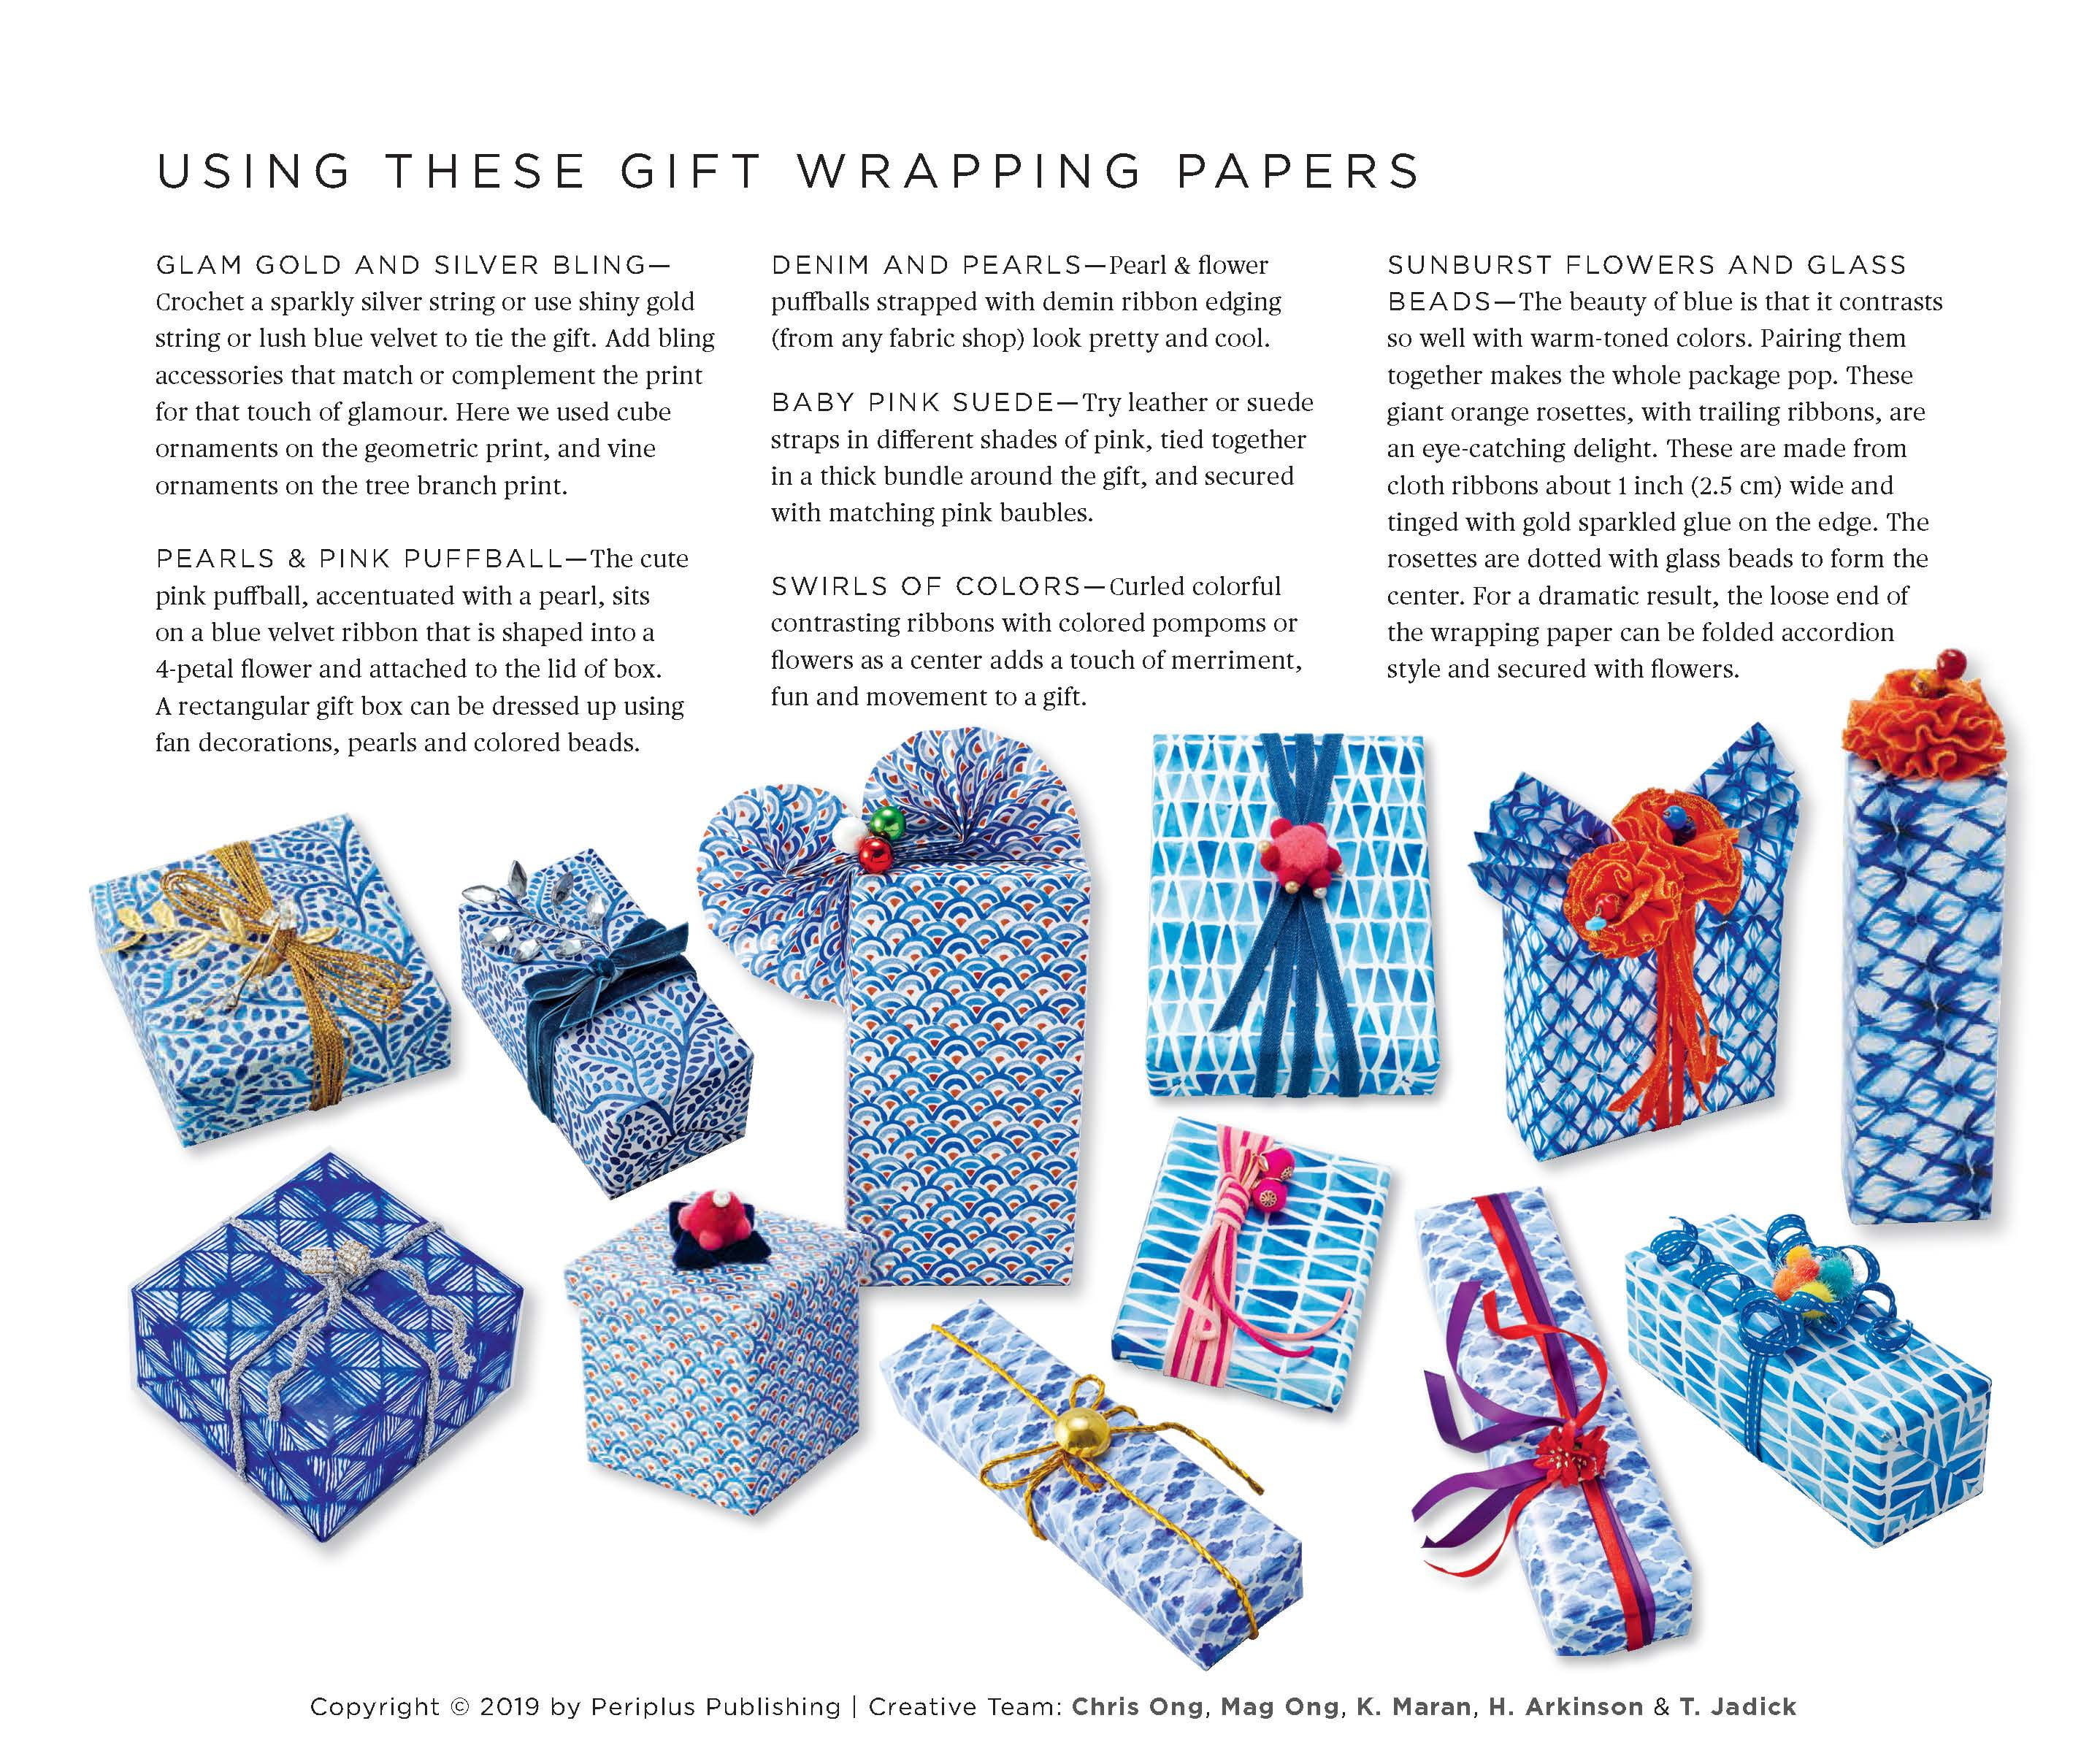 24 Royal Blue Non-Woven Floral Wrapping Paper - 50 Sheets